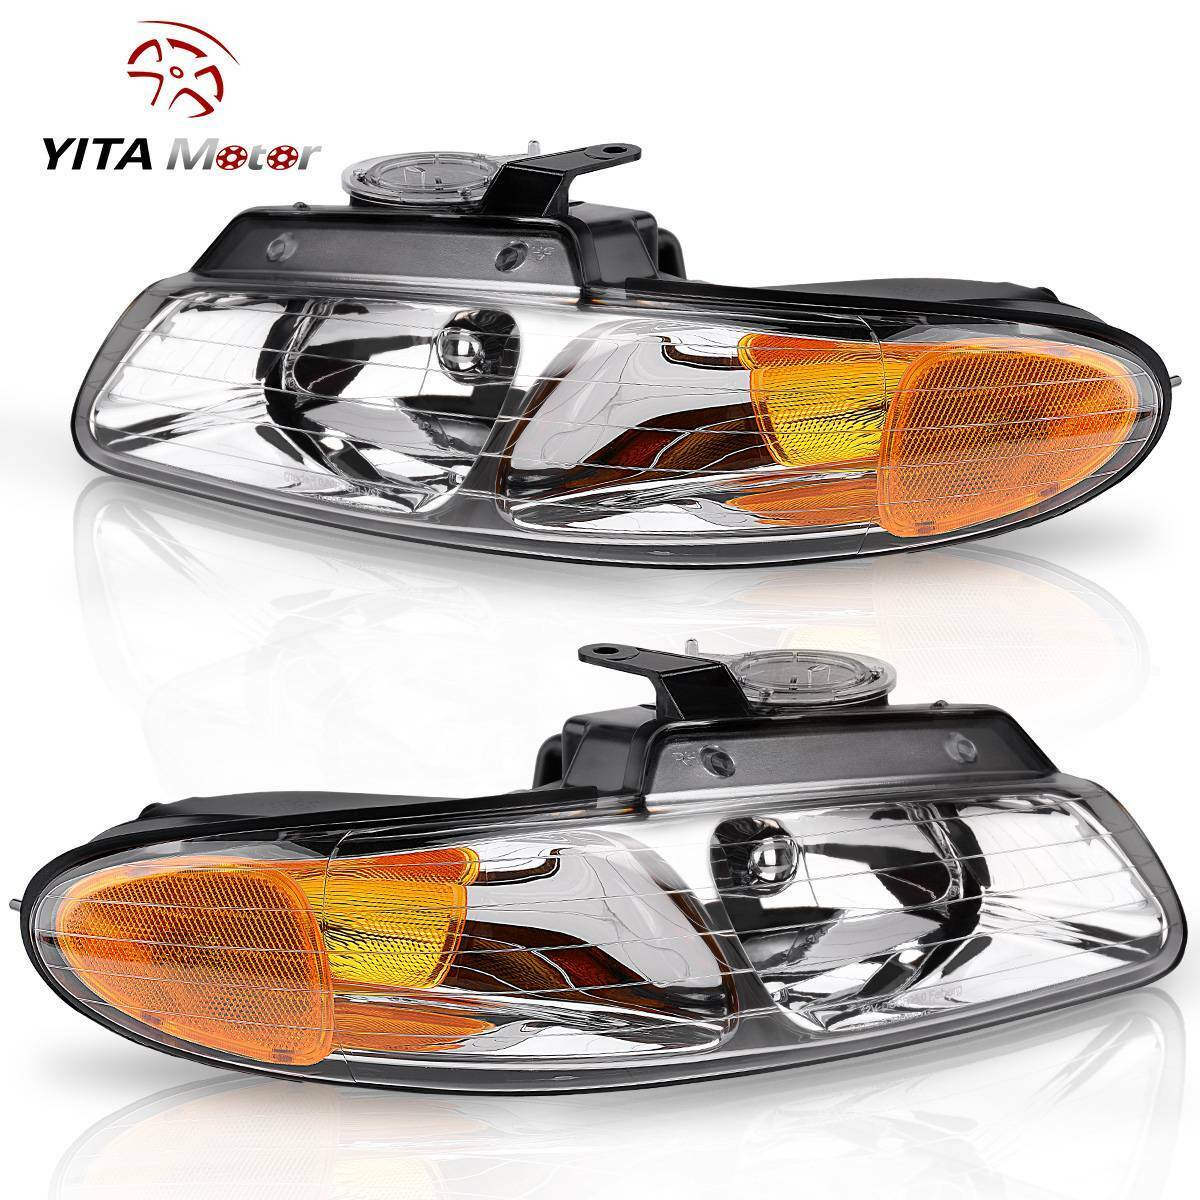 Headlights Assembly for 1996-2000 Dodge Caravan Chrysler Town & Country Voyager